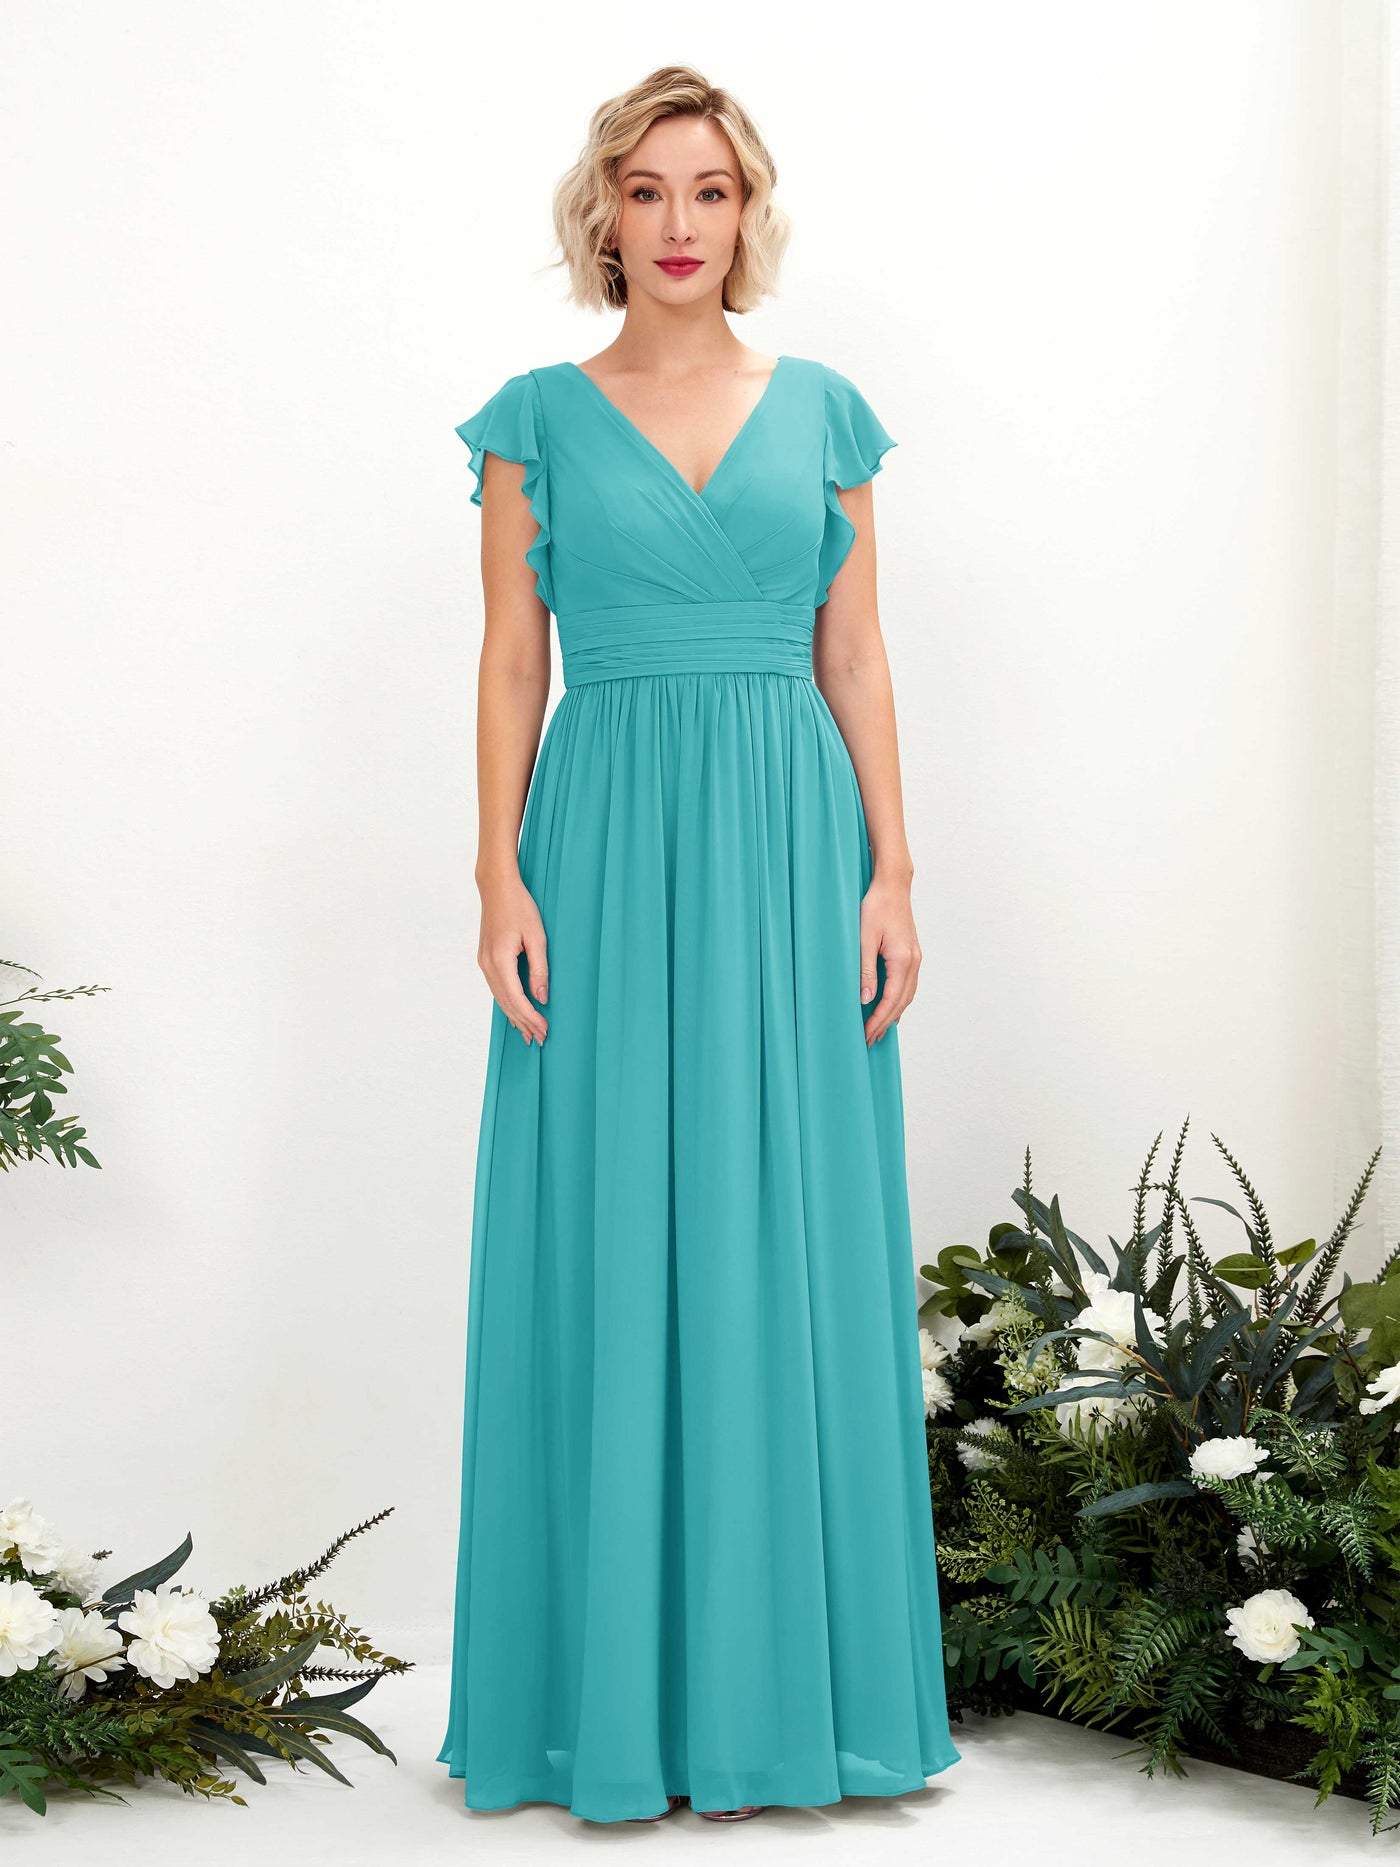 Turquoise Bridesmaid Dresses Bridesmaid Dress A-line Chiffon V-neck Full Length Short Sleeves Wedding Party Dress (81222723)#color_turquoise